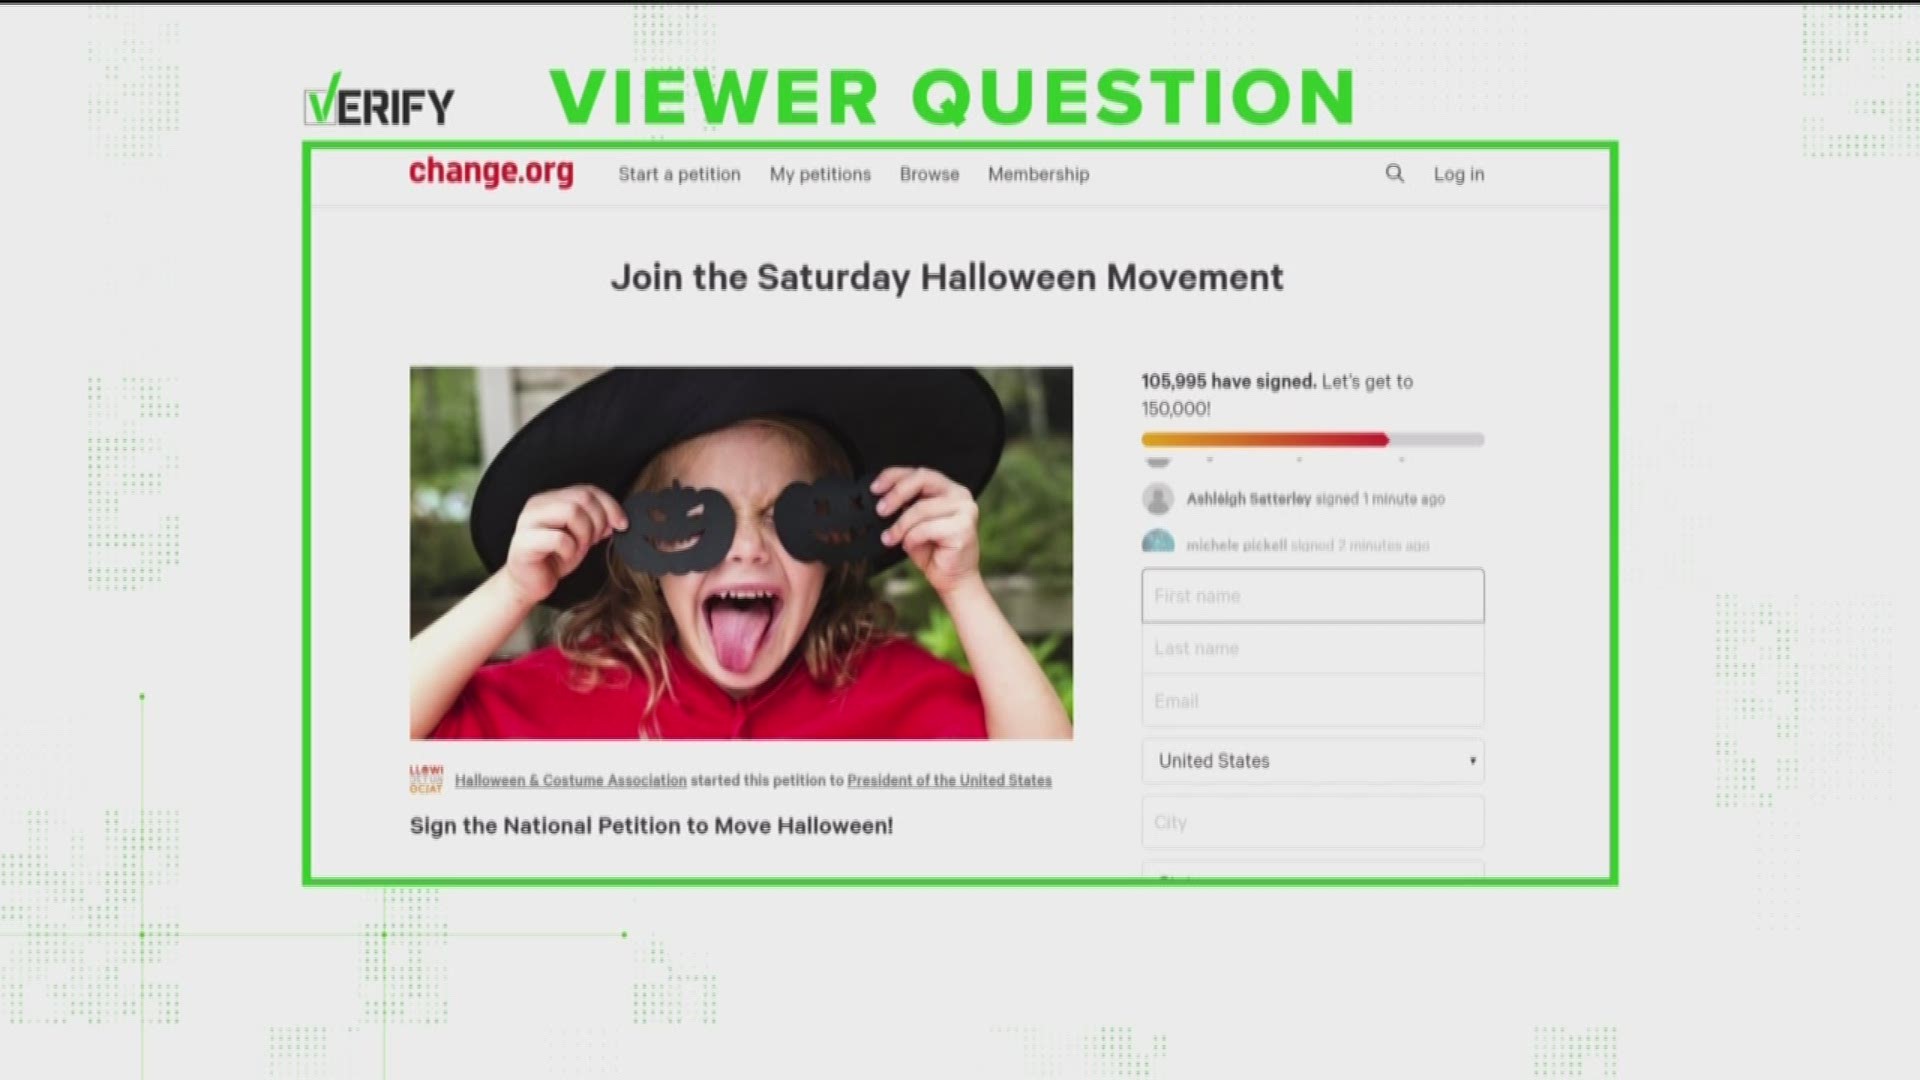 More than 100,000 people have signed a petition to say they want President Trump to move Halloween to the last Saturday in October. So, News 8 looked to VERIFY, does he have the power to do so? 

News 8 checked with the congressional research service and Library of Congress and found there is some precedence of presidents creating and moving holidays with a proclamation.